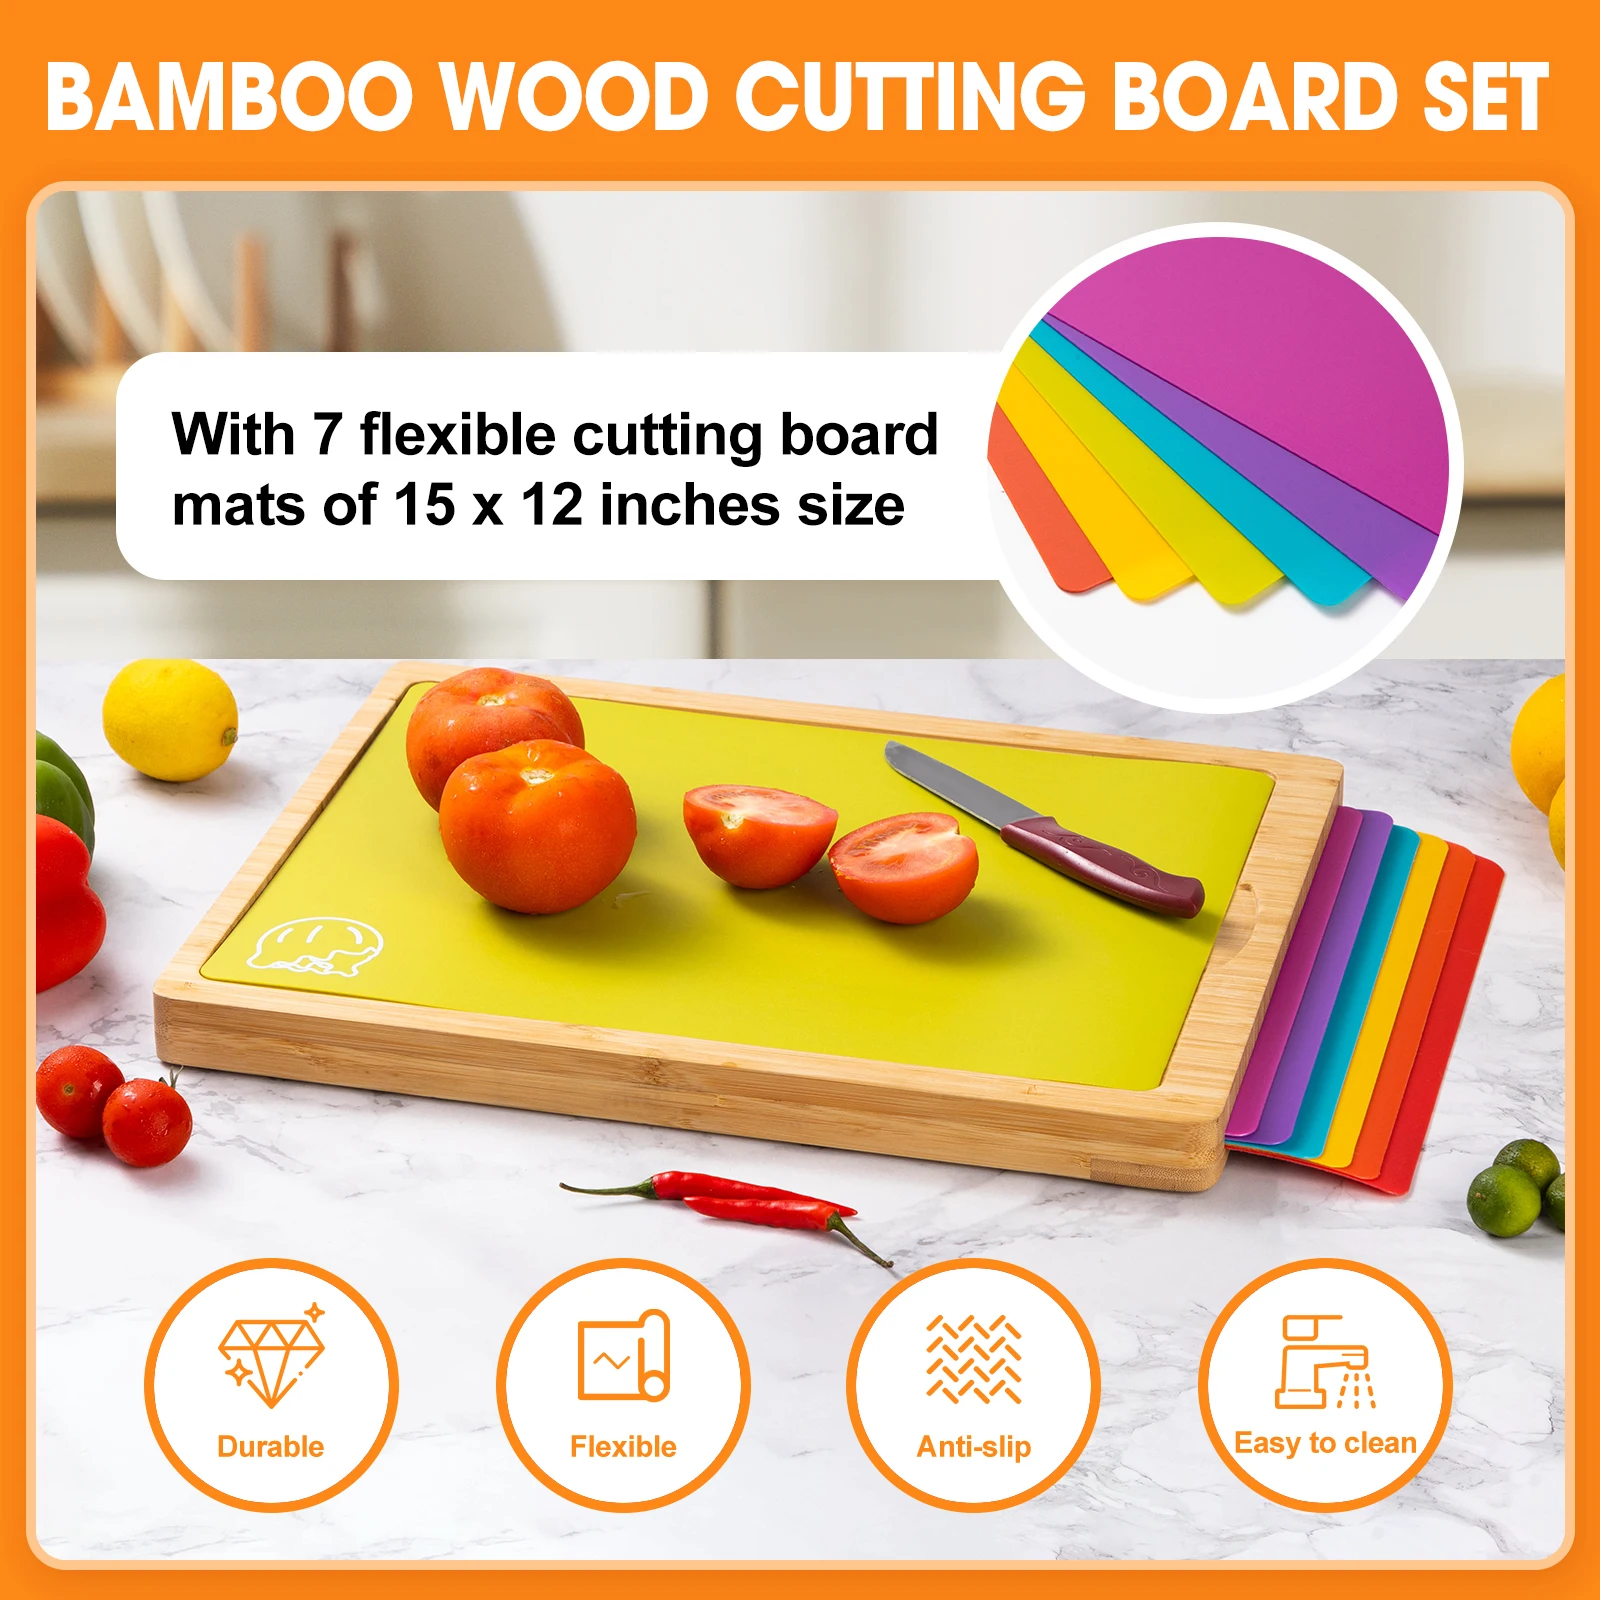 https://ae01.alicdn.com/kf/S5ff017c5f190442ab3de7772454c8401S/Bamboo-Wood-Cutting-Board-Set-with-7-Flexible-Cutting-Mats-with-Food-Icons-Easy-to-Clean.jpg